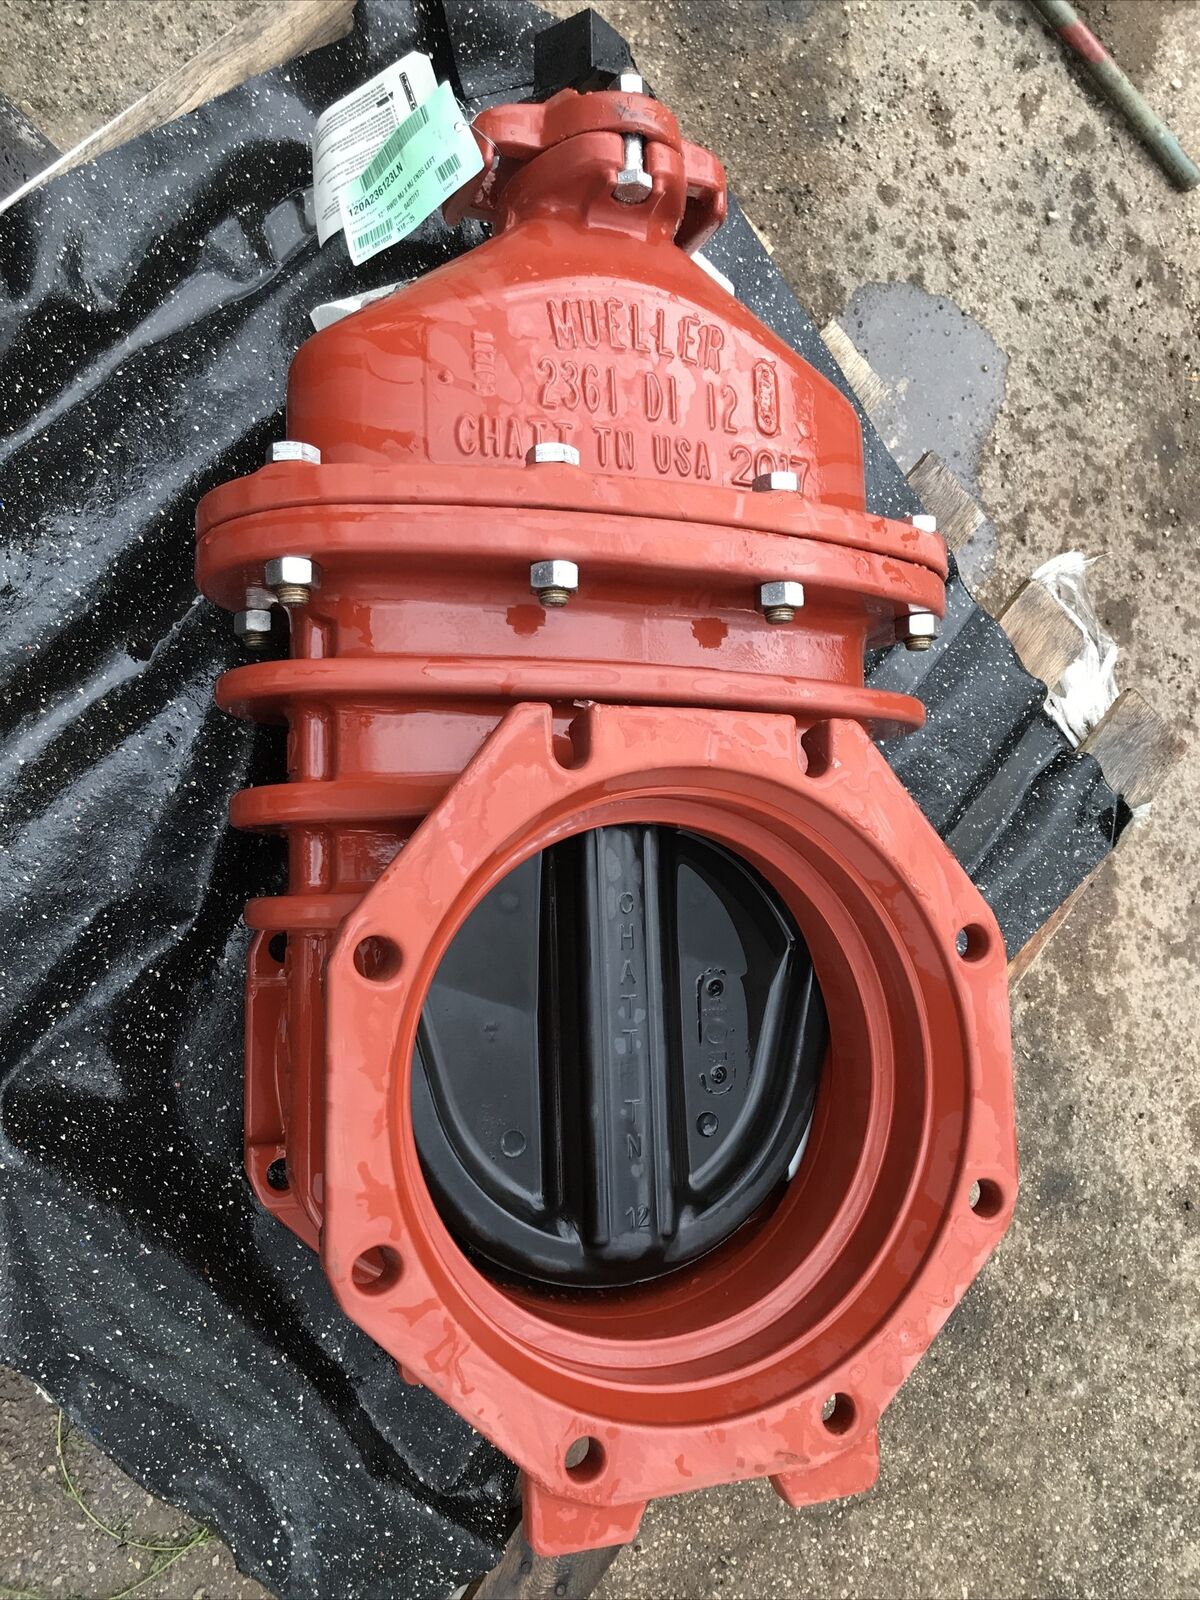 12” Gate Valve Mueller Mj X Mj O/l Resilient 2361 Di Usa 2017 Mechanical Joint